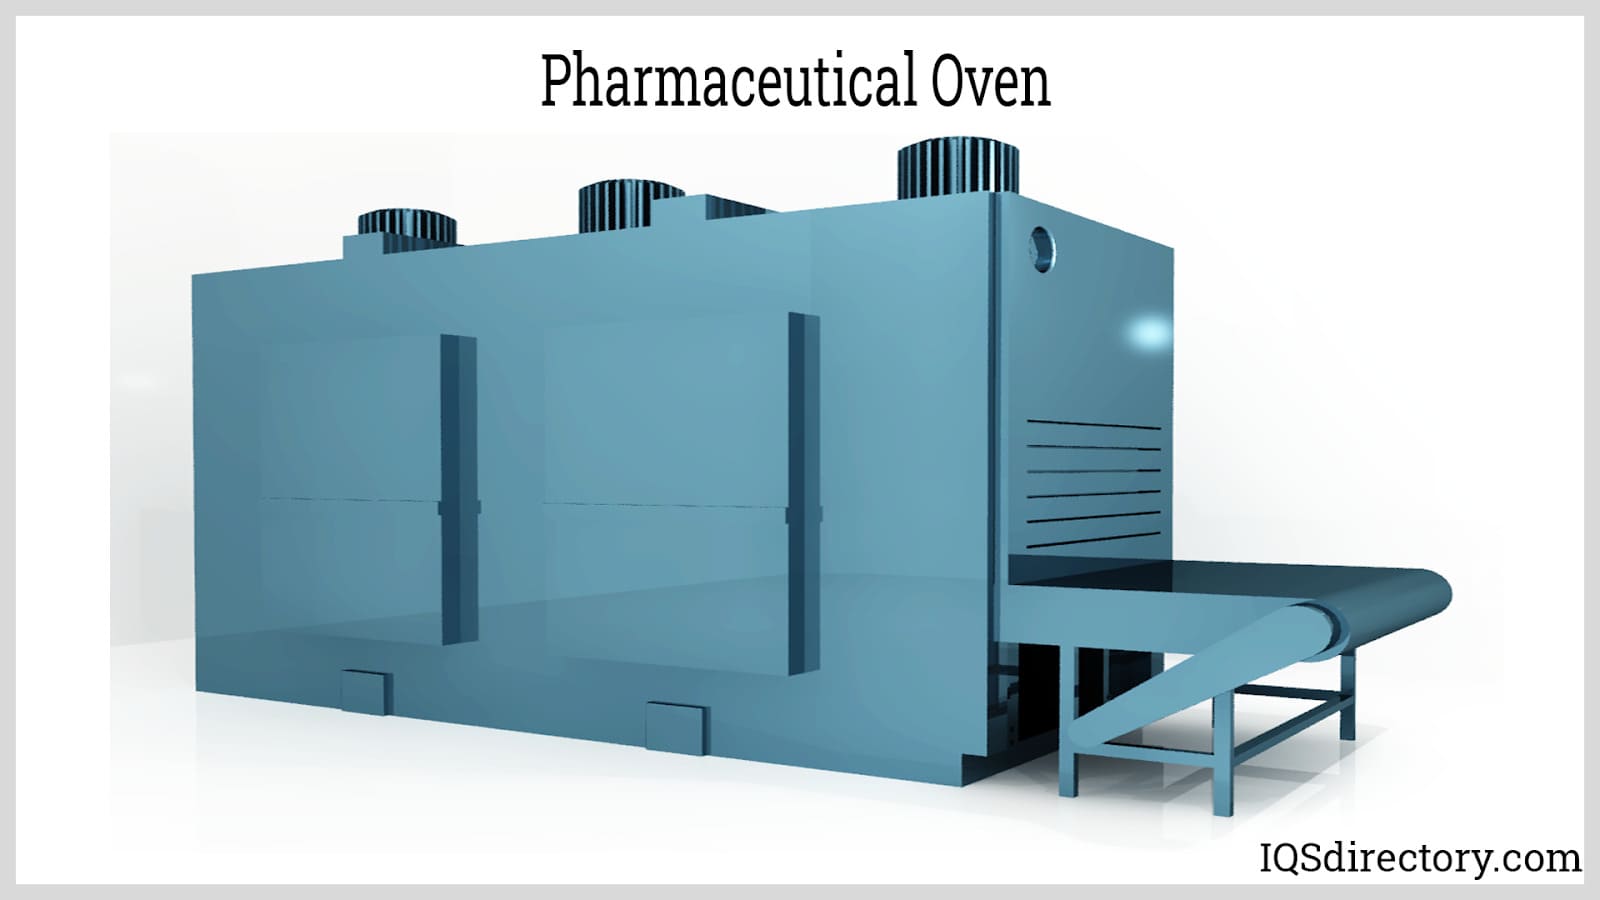 https://www.iqsdirectory.com/articles/industrial-oven/phramaceutical-oven.jpg